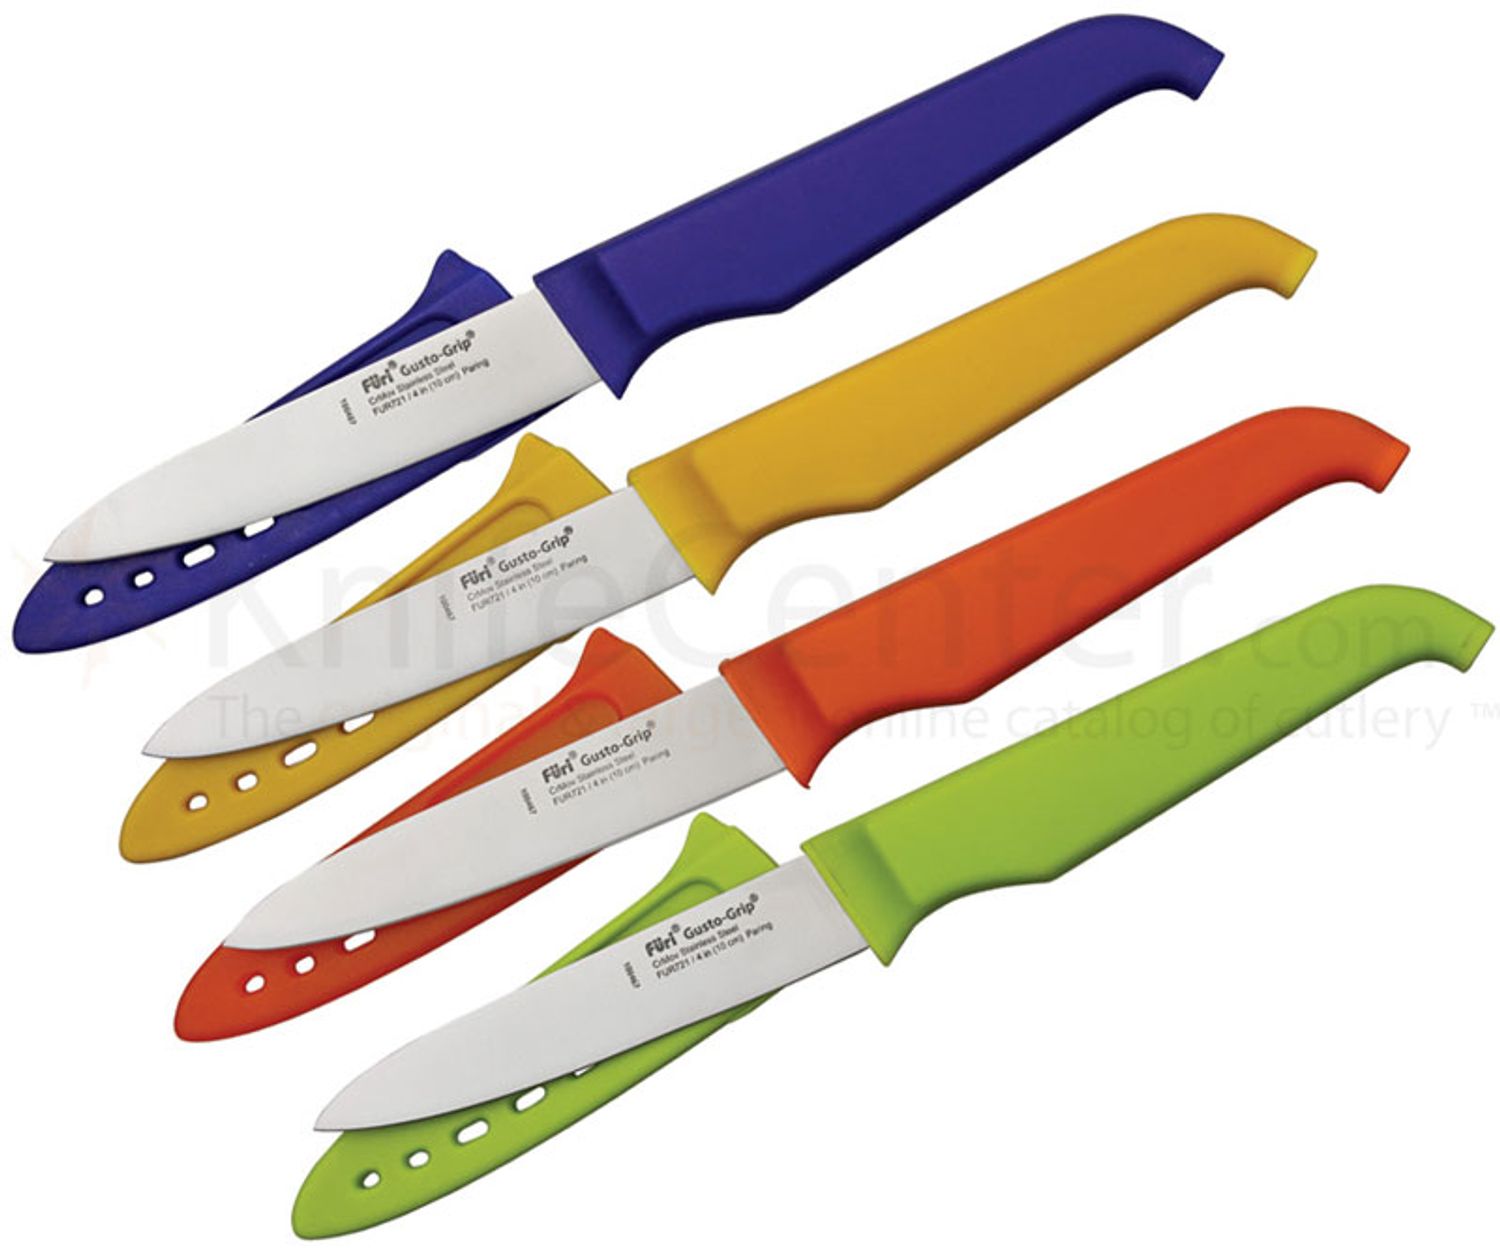 Rachel Ray 7″ Furi Knife Only $19.99 {Includes Self-Sharpening Case}